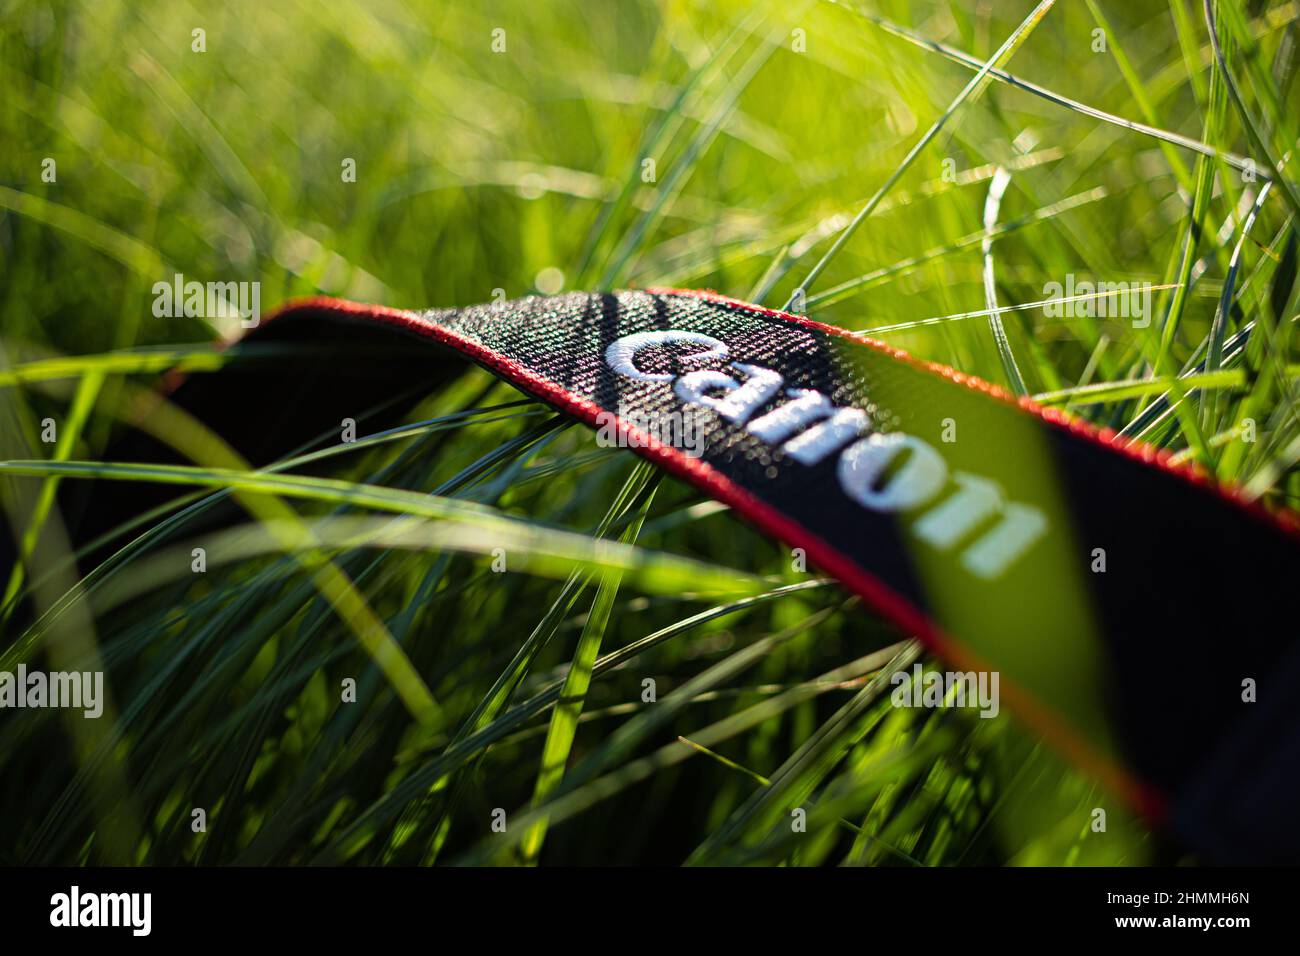 Close-up of a Canon camera strap lying in the grass on a sunny day in the garden. Stock Photo